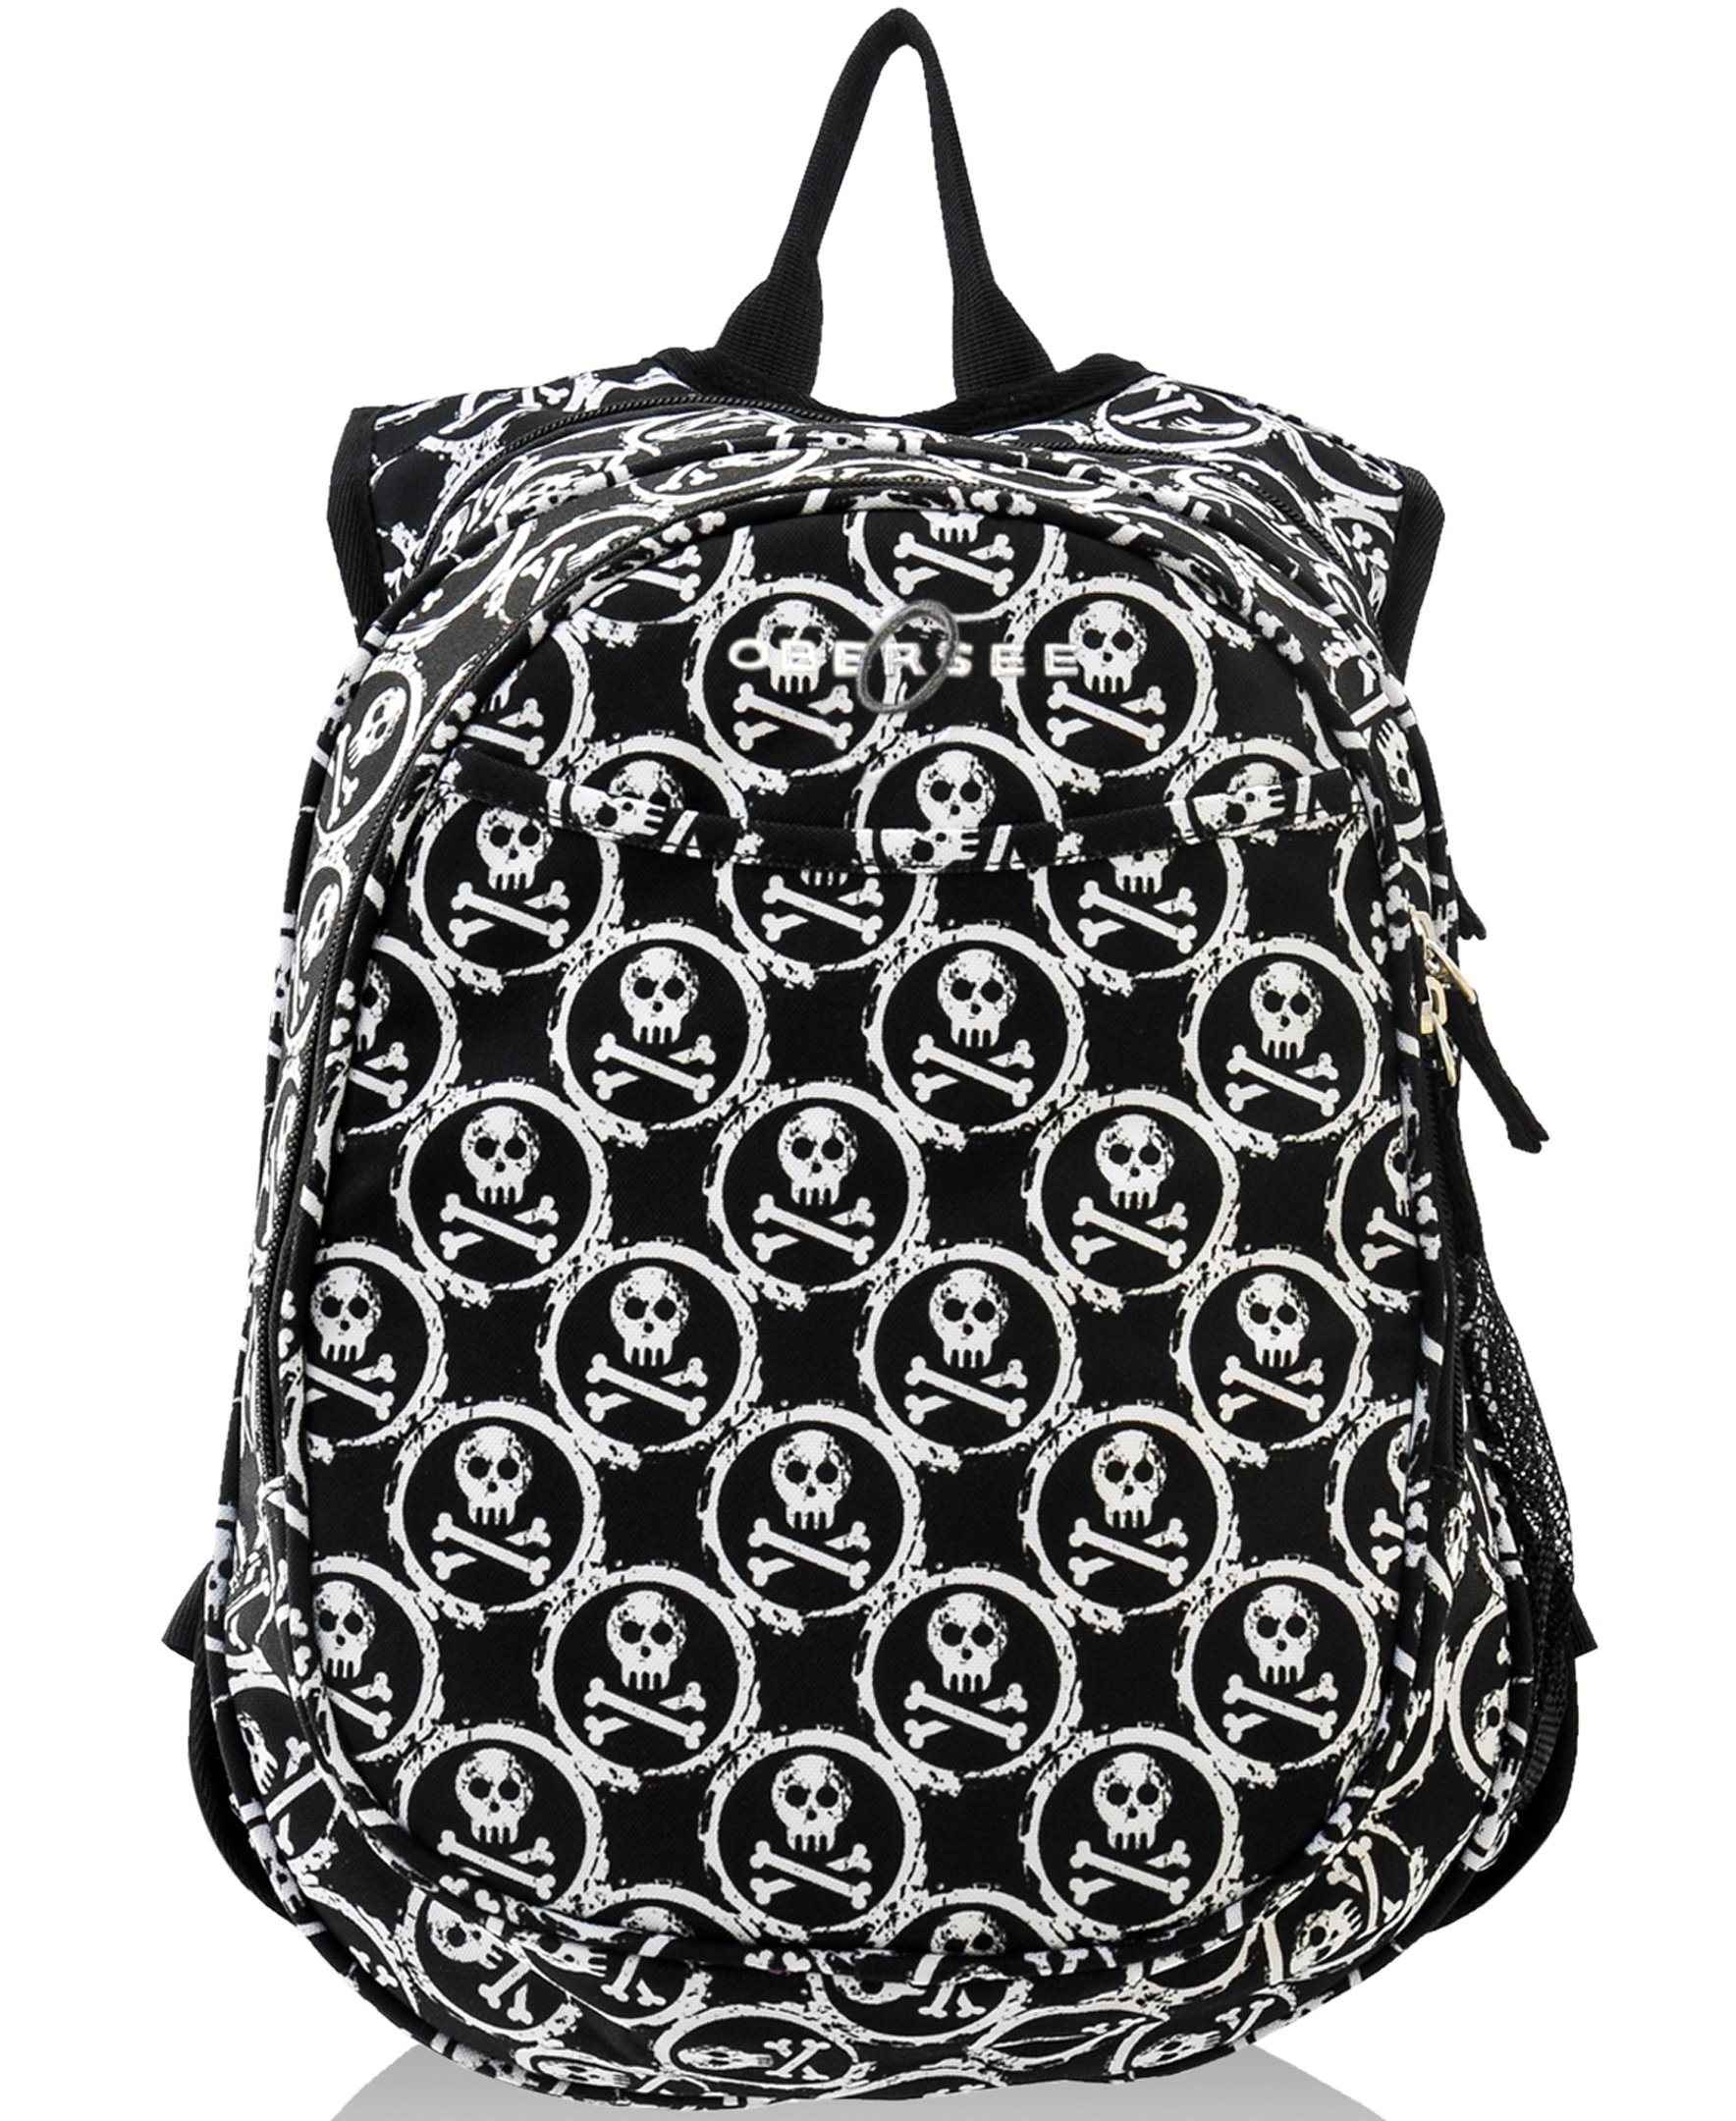 O3KCBP016 Obersee Mini Preschool All-in-One Backpack for Toddlers and Kids with integrated Insulated Cooler | Skulls - image 1 of 3